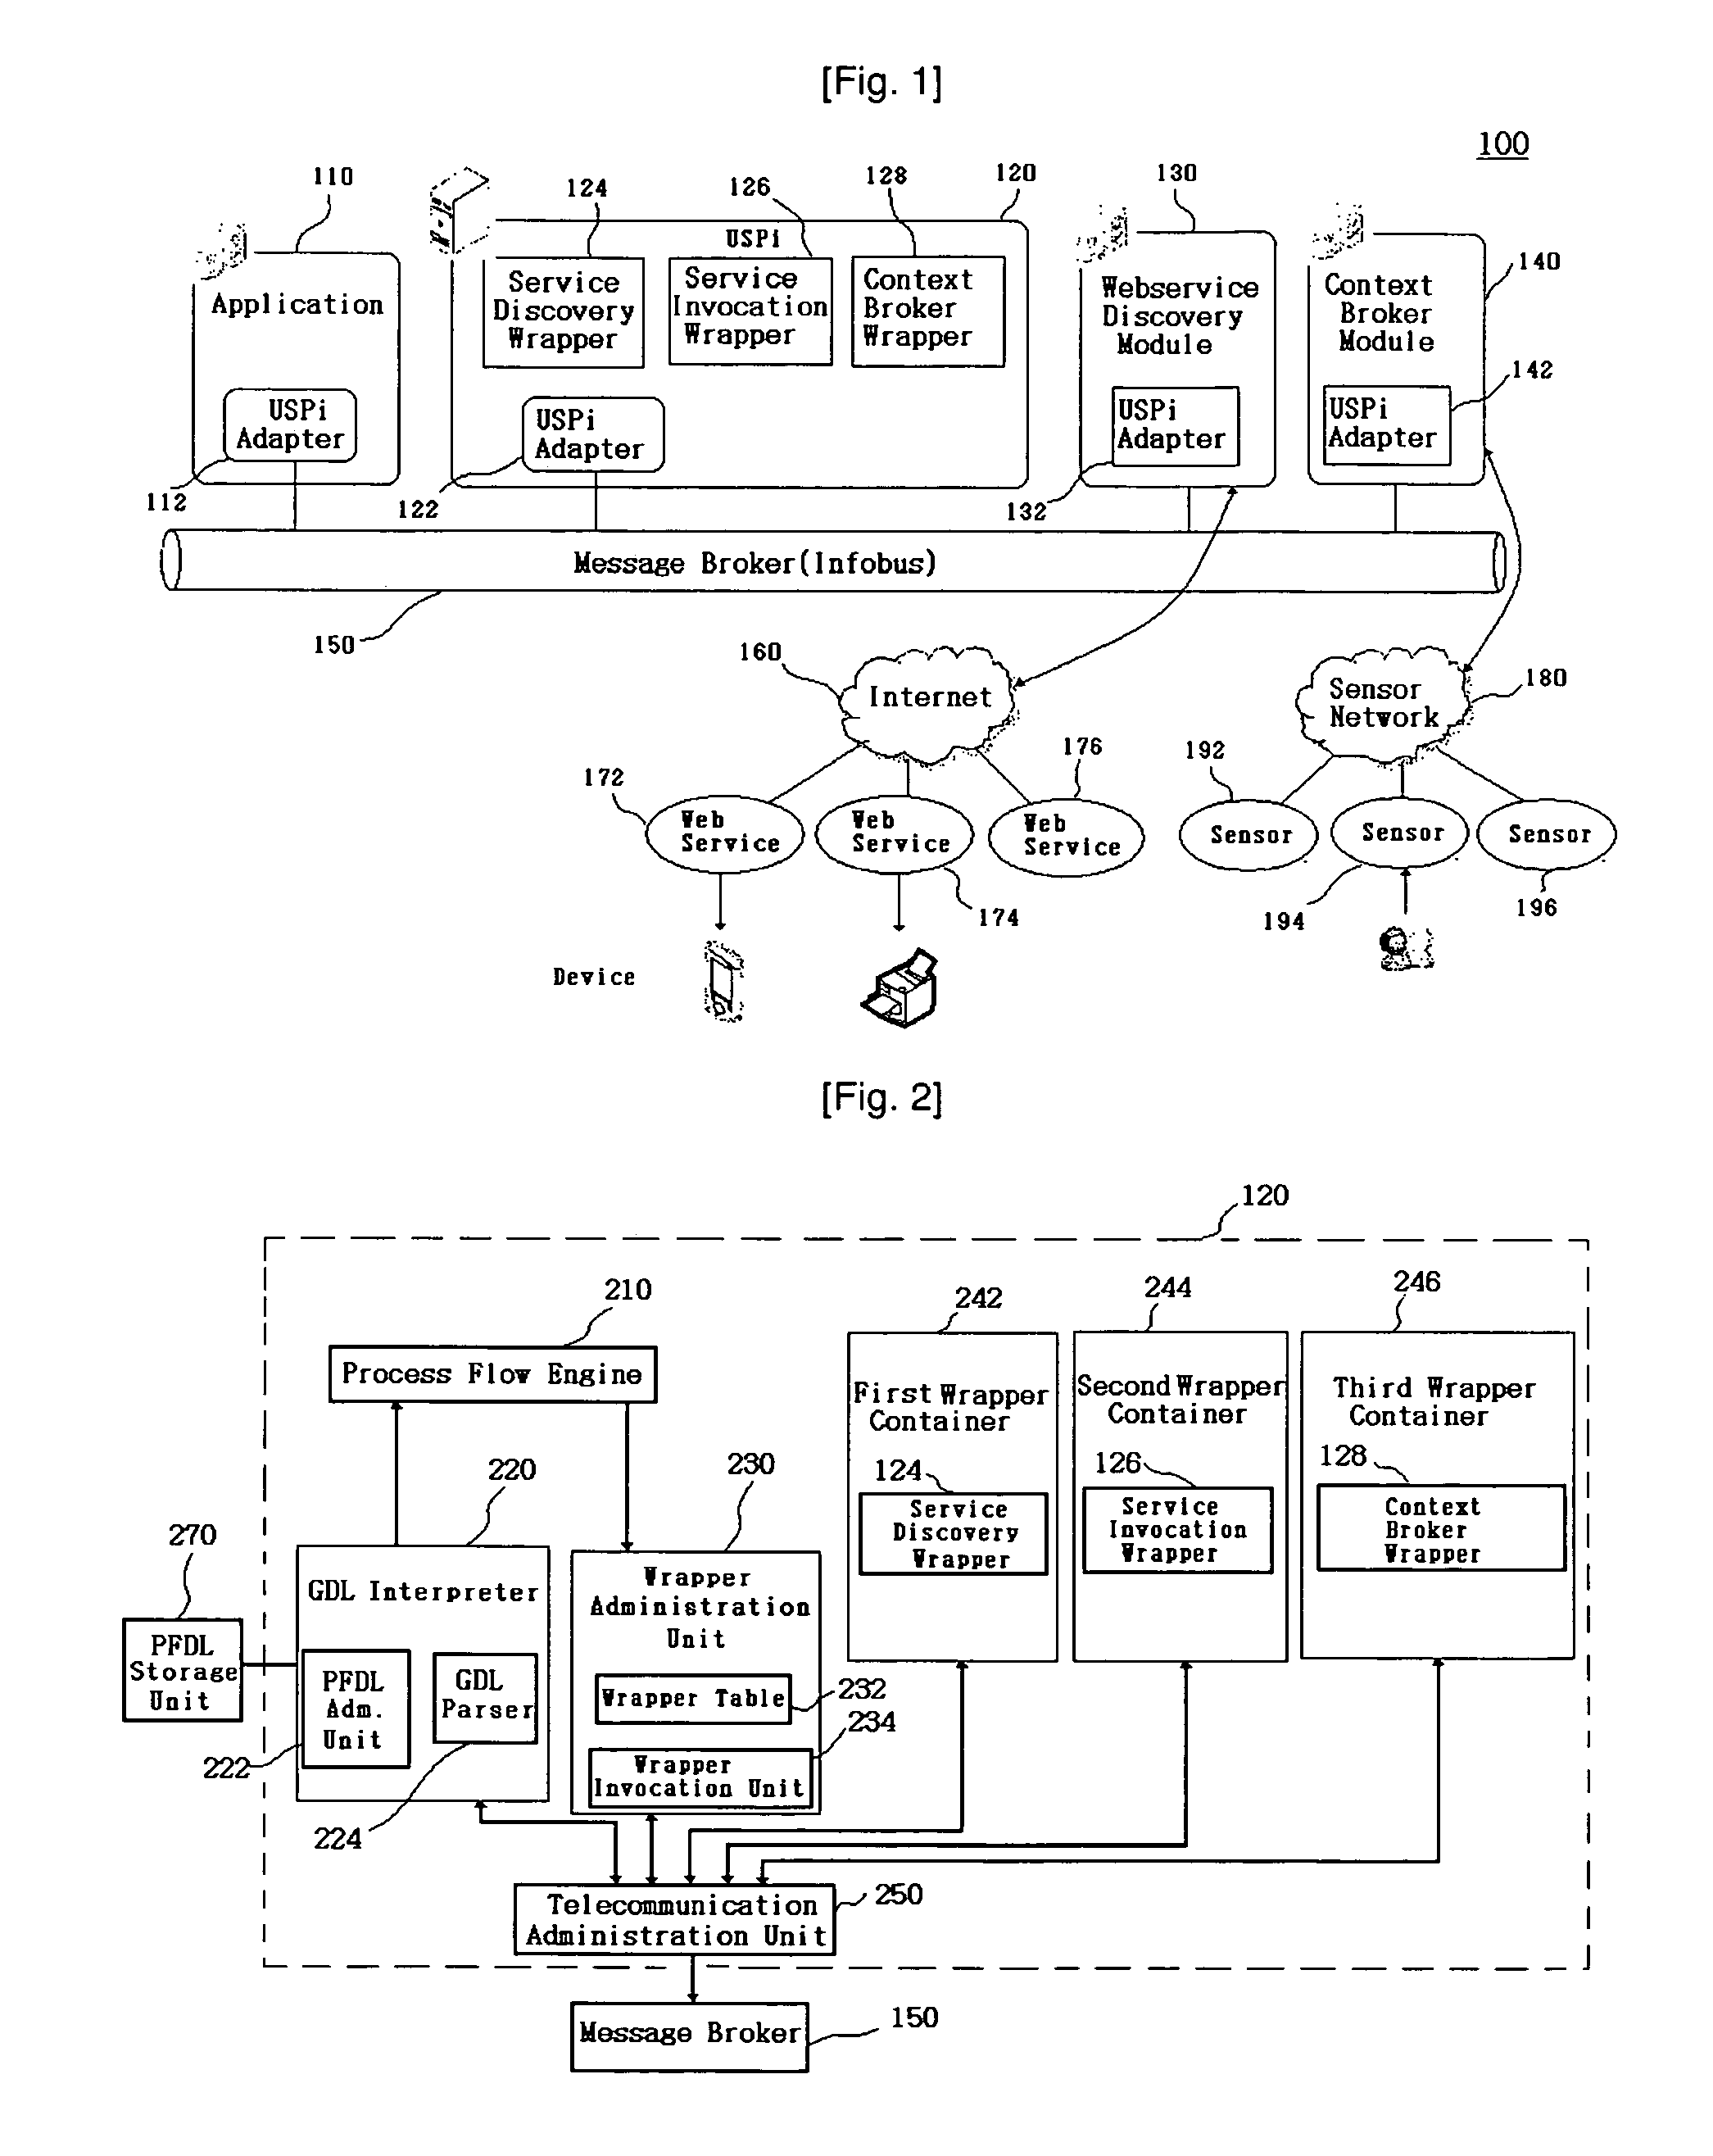 Open framework system for heterogeneous computing and service integration